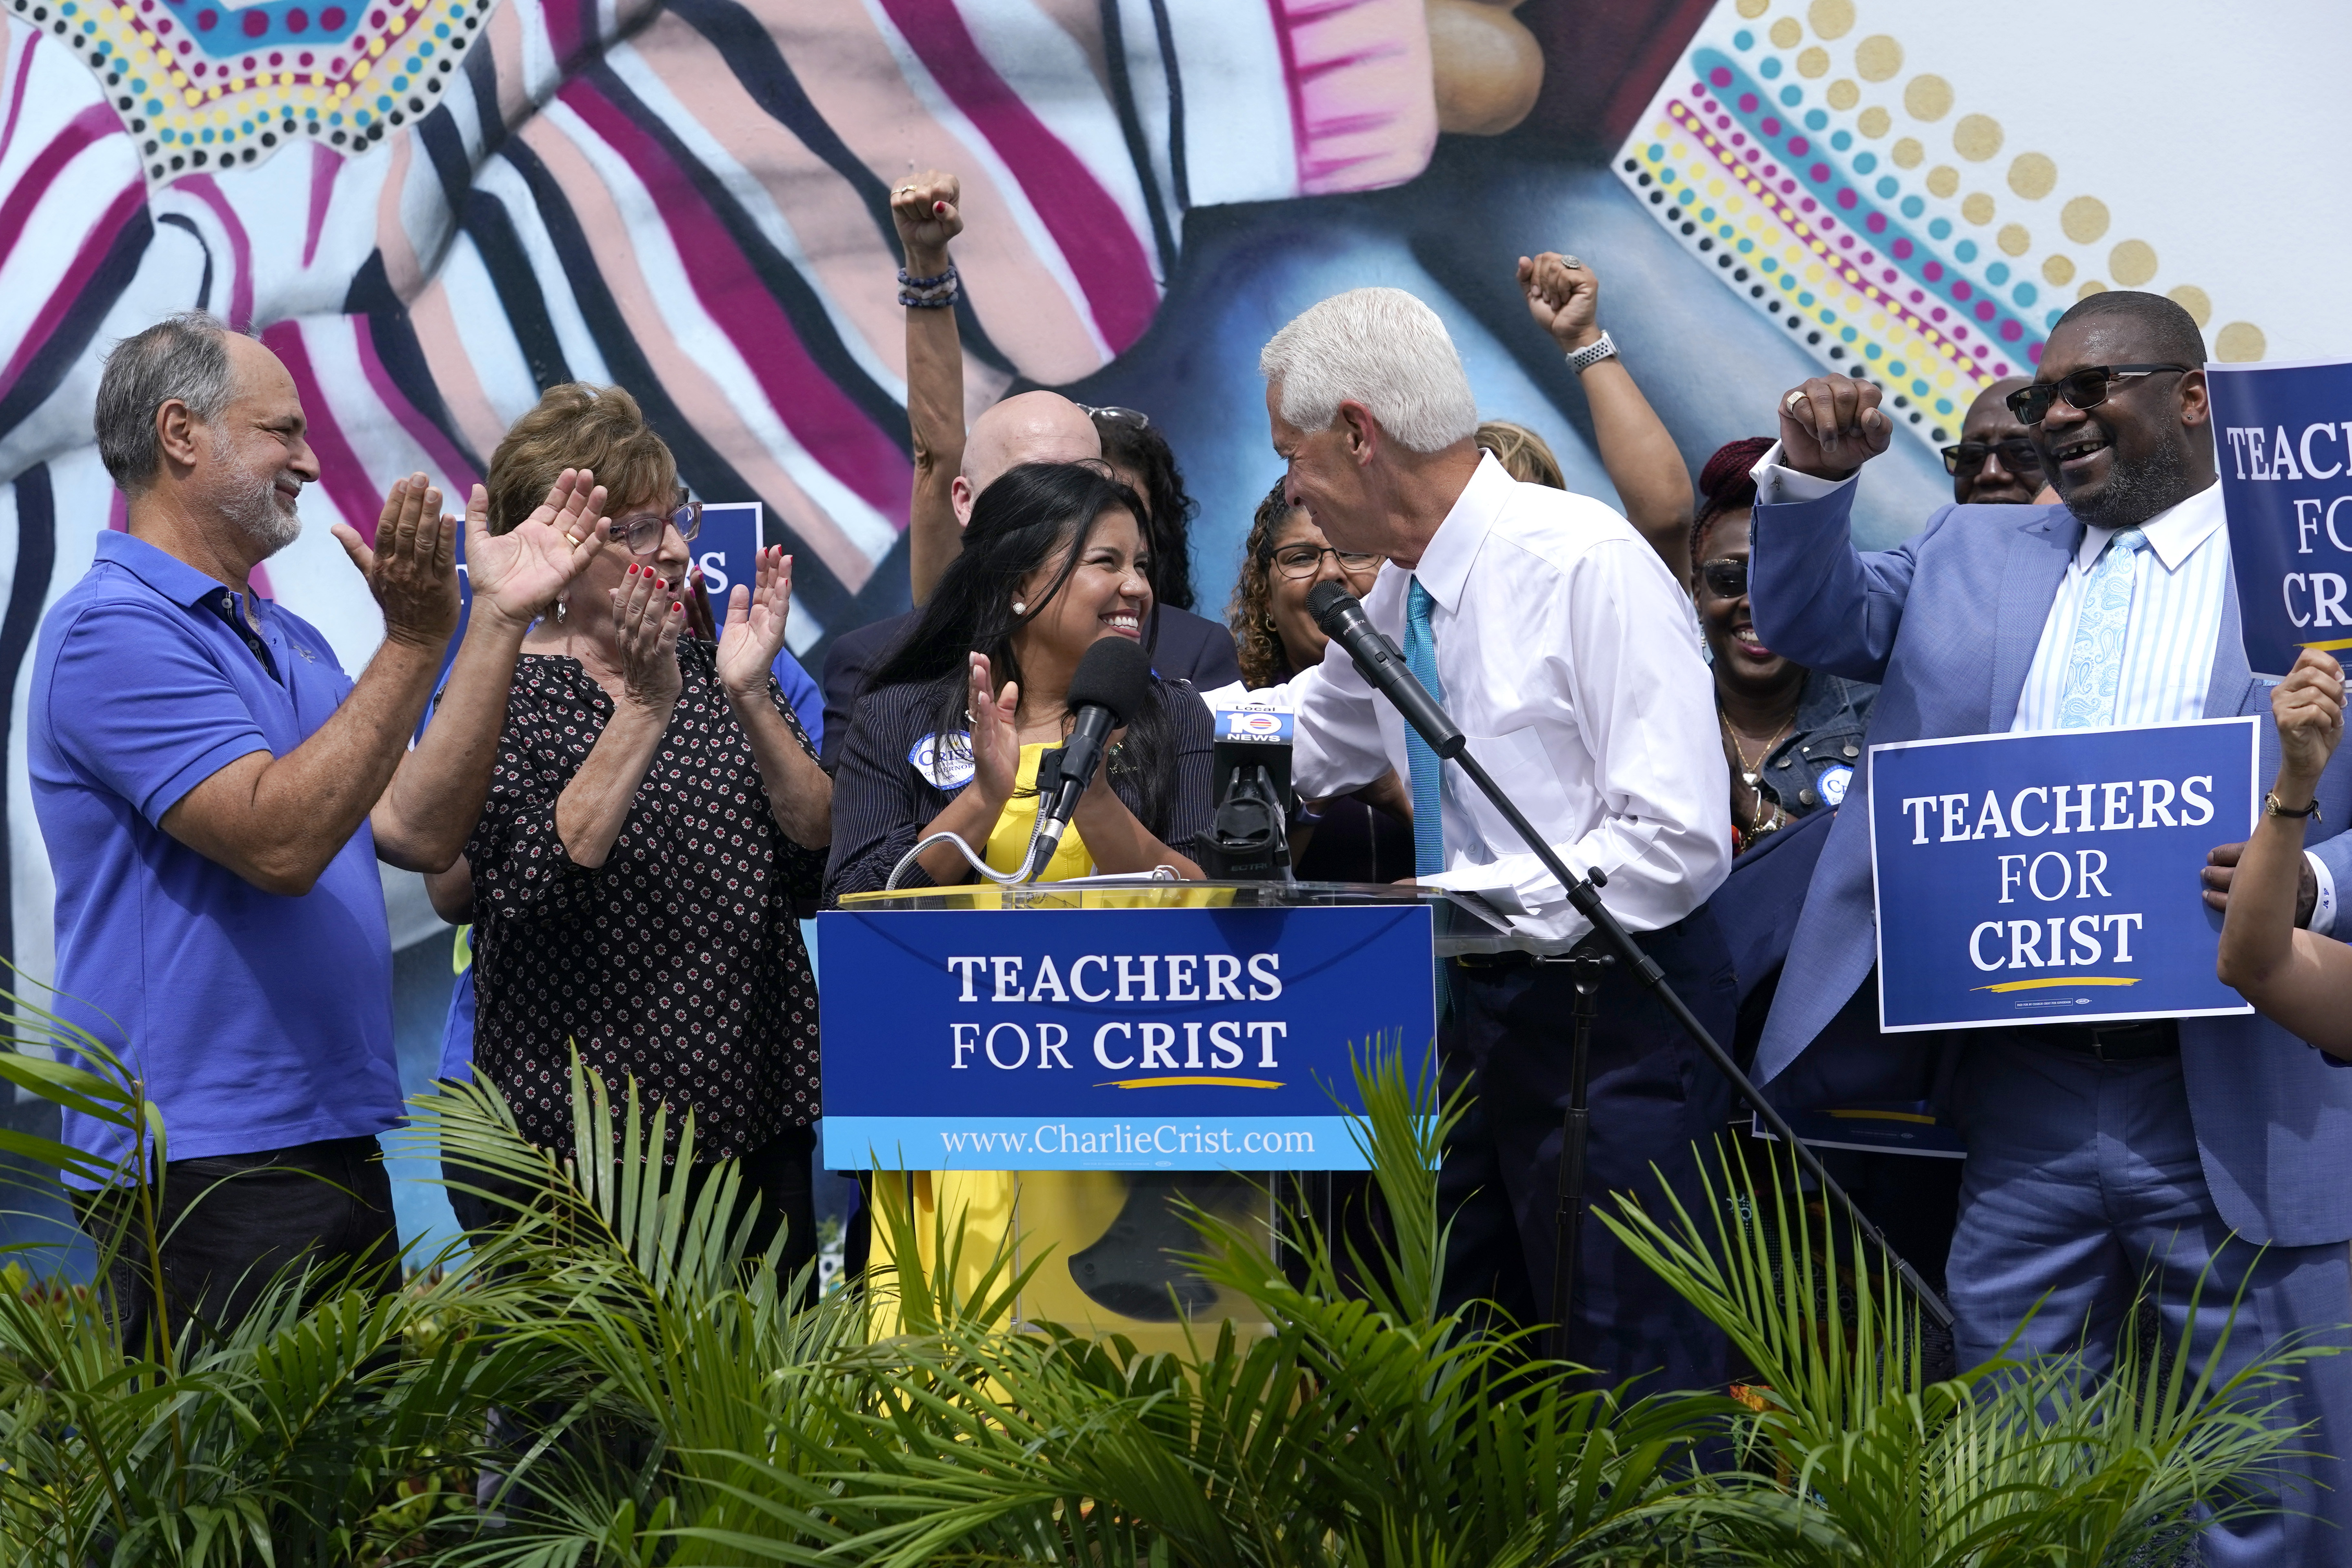 Charlie Crist,second from right, stands with United Teachers of Dade President Karla Hernandez-Mats.